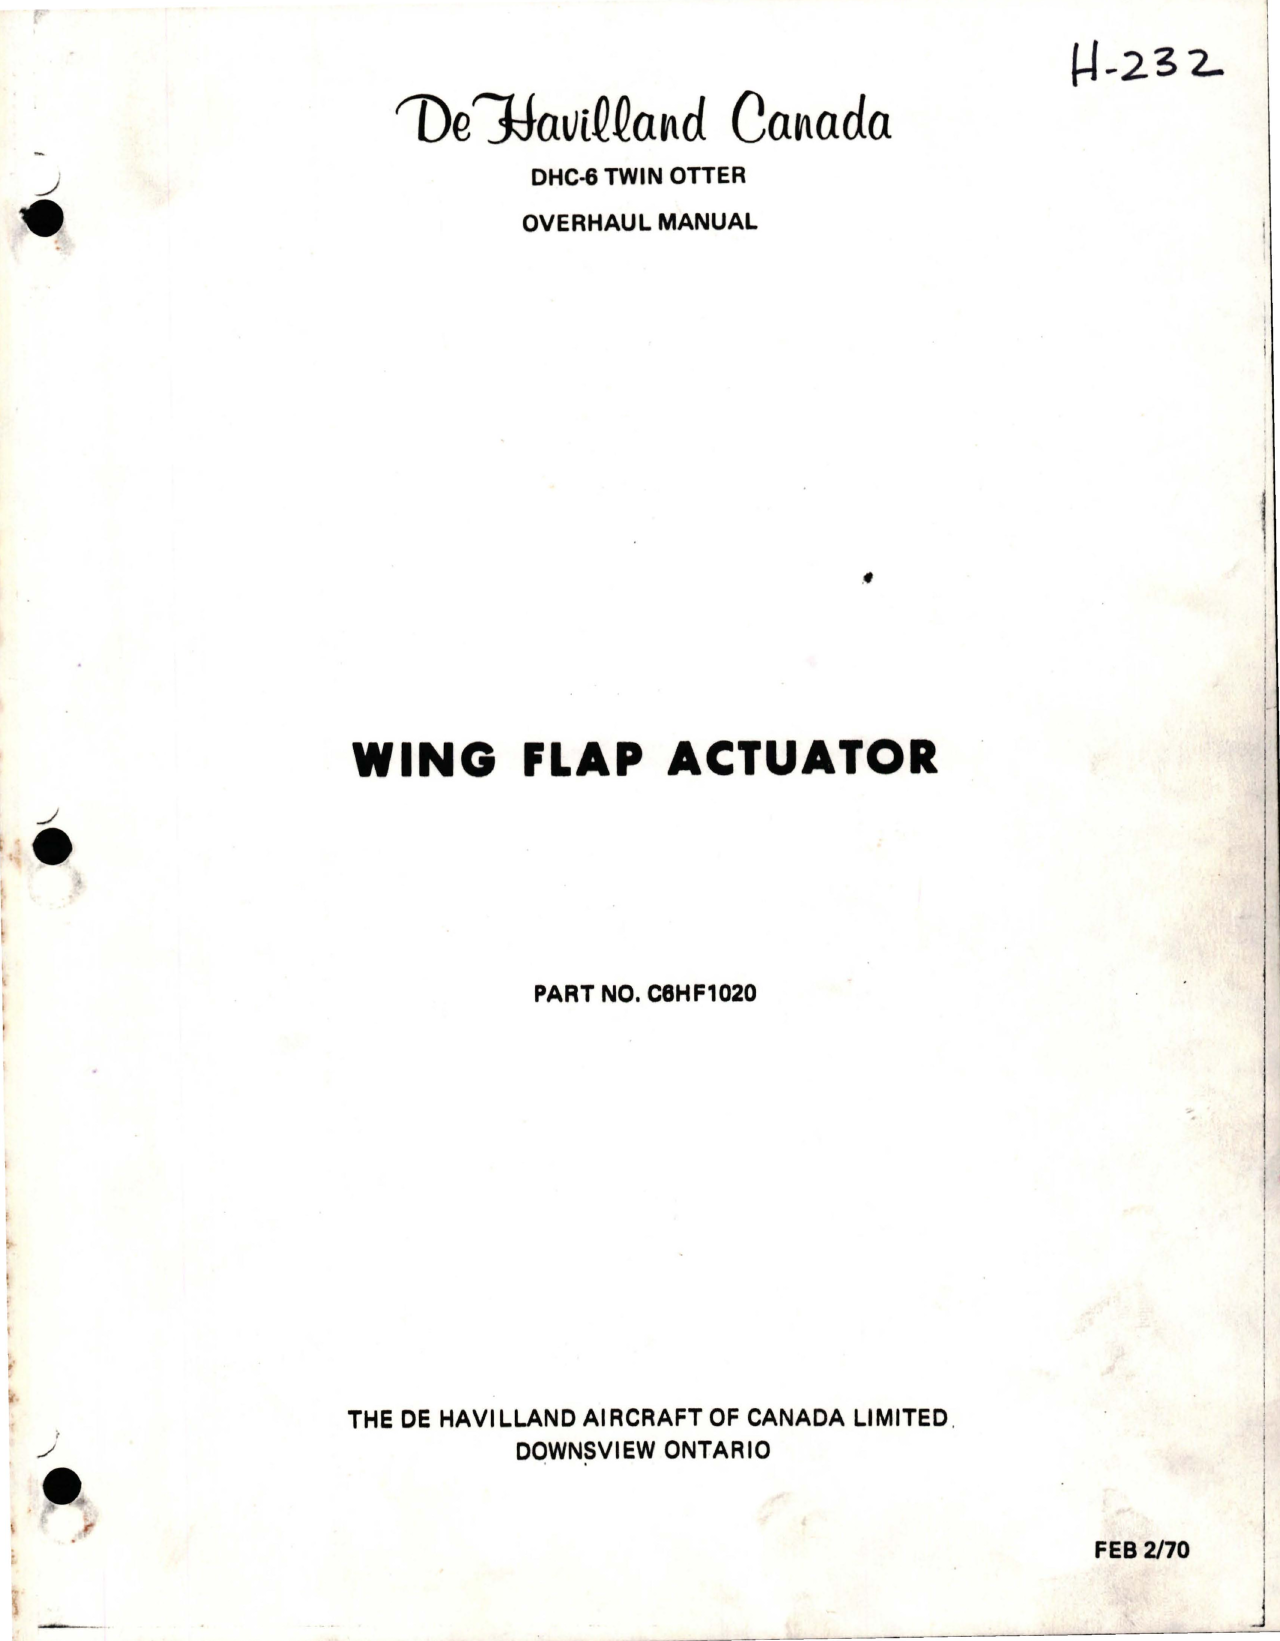 Sample page 1 from AirCorps Library document: Overhaul Manual for Wing Flap Actuator - Part C6HF1020